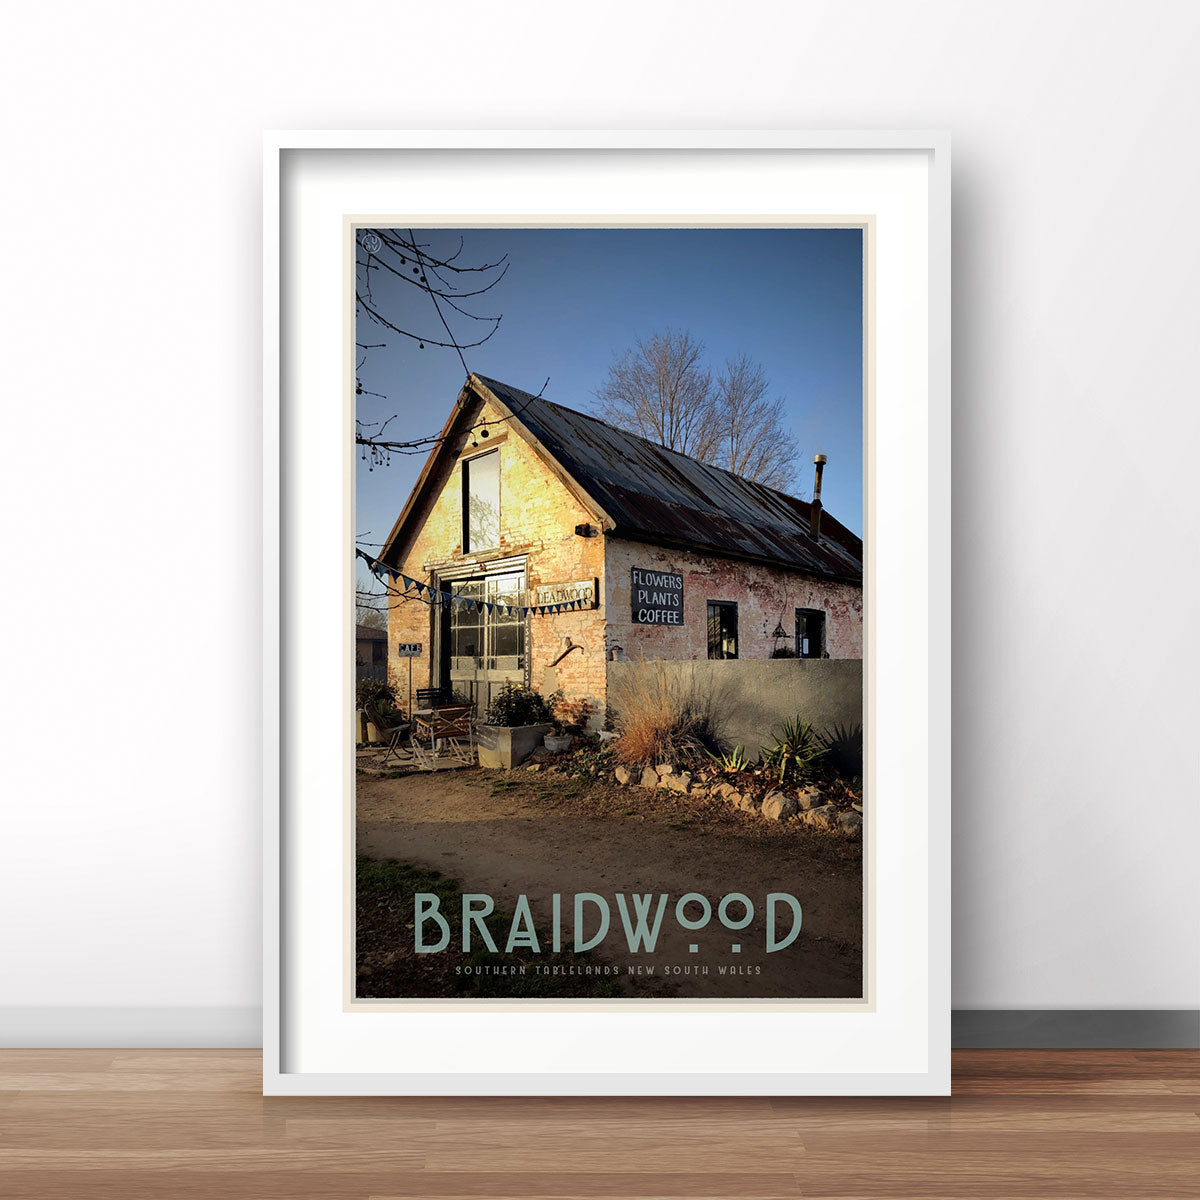 Braidwood cafe white framed vintage travel style poster. Original design by Places We Luv